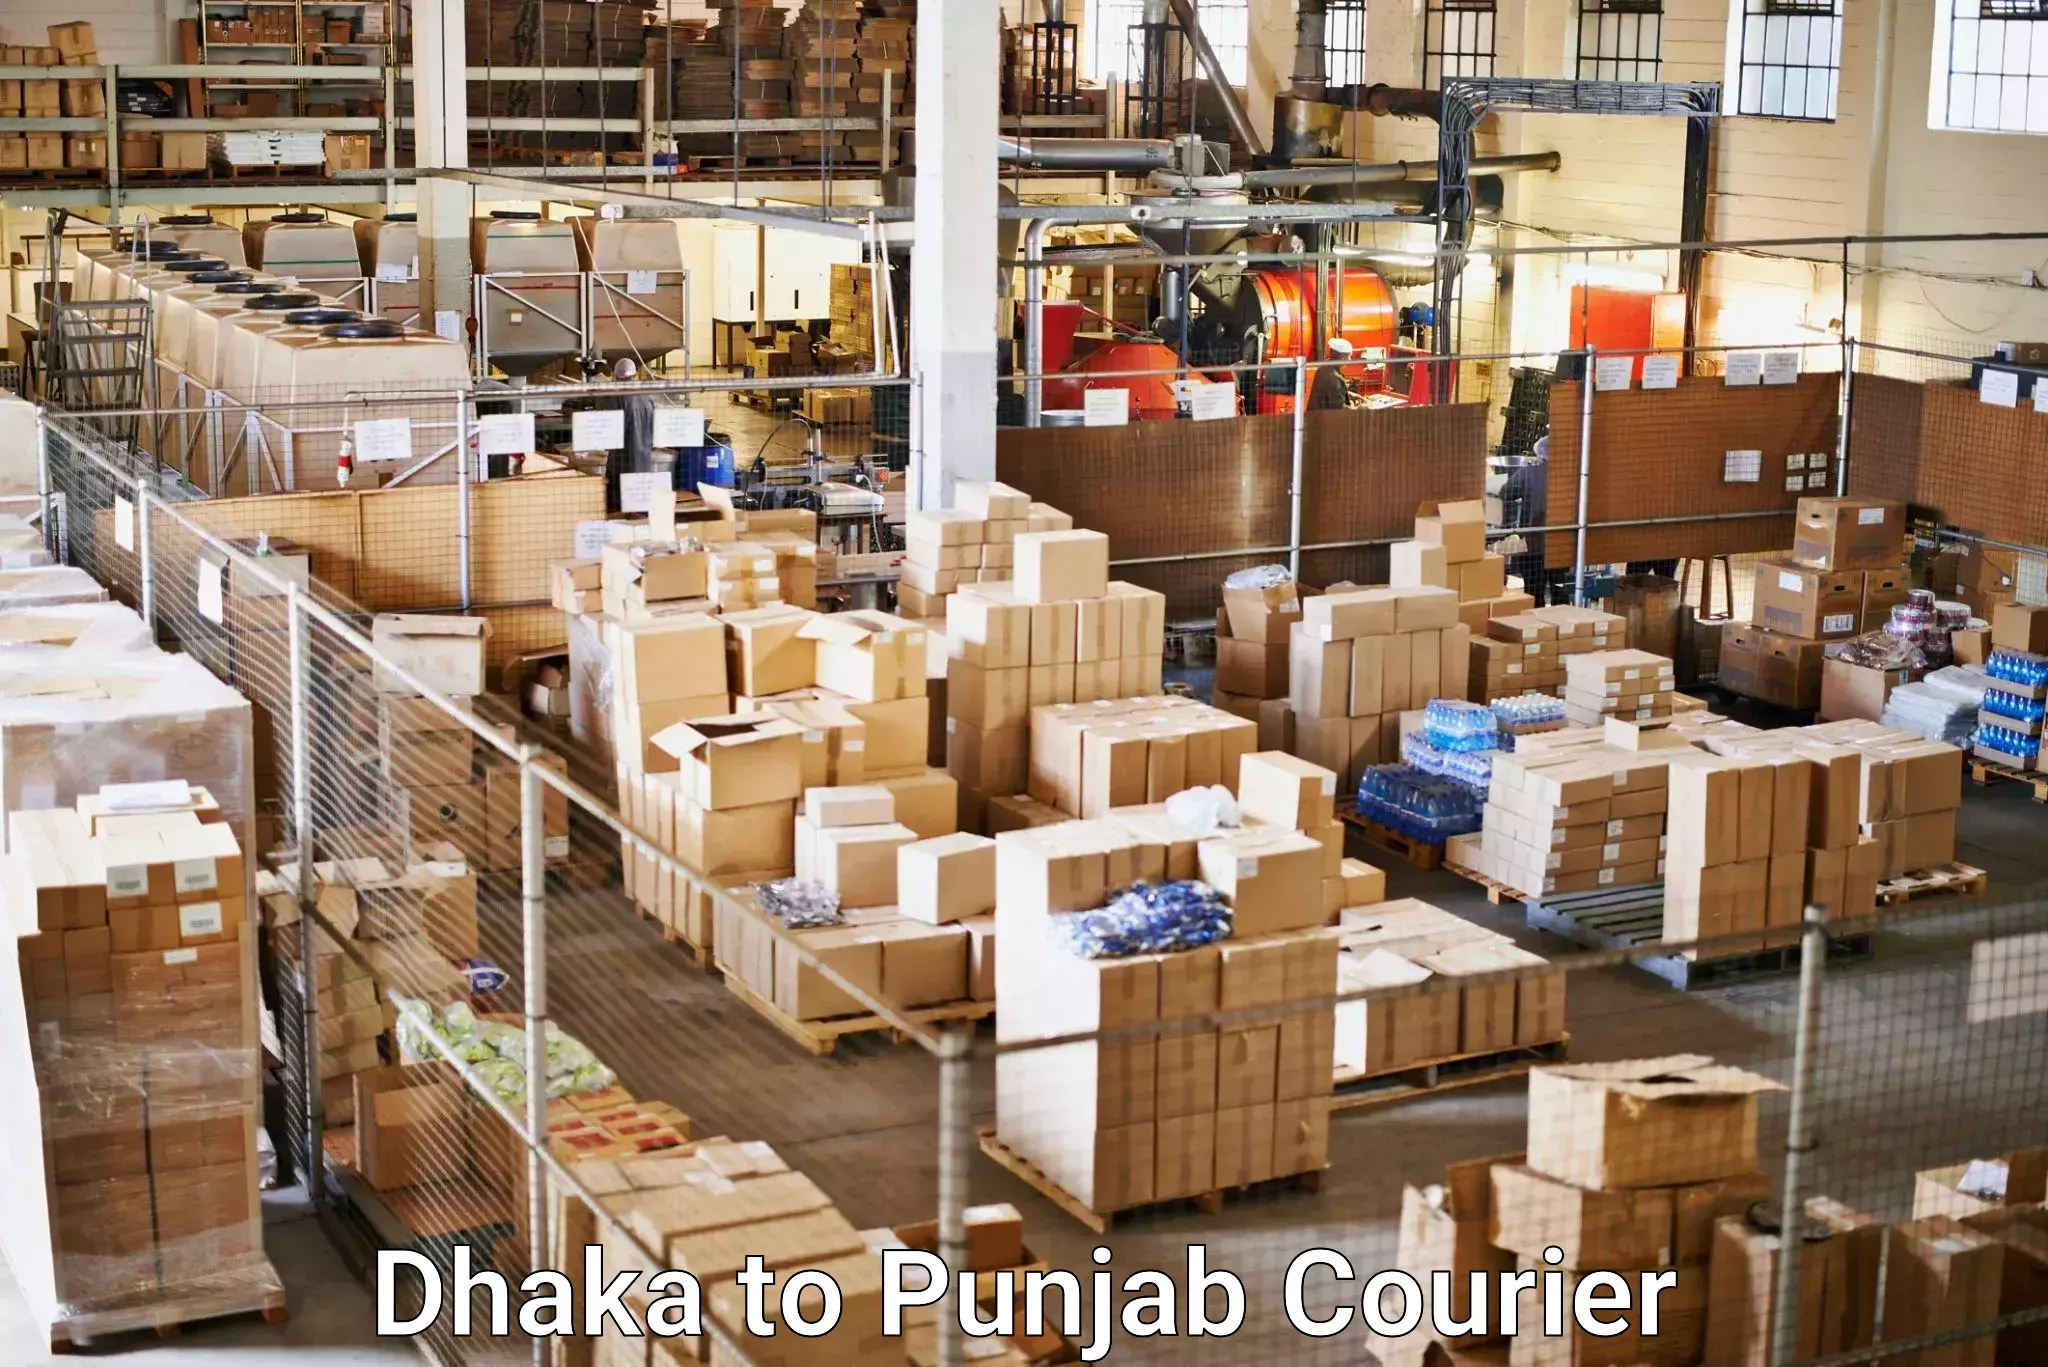 Package delivery network Dhaka to Dhuri